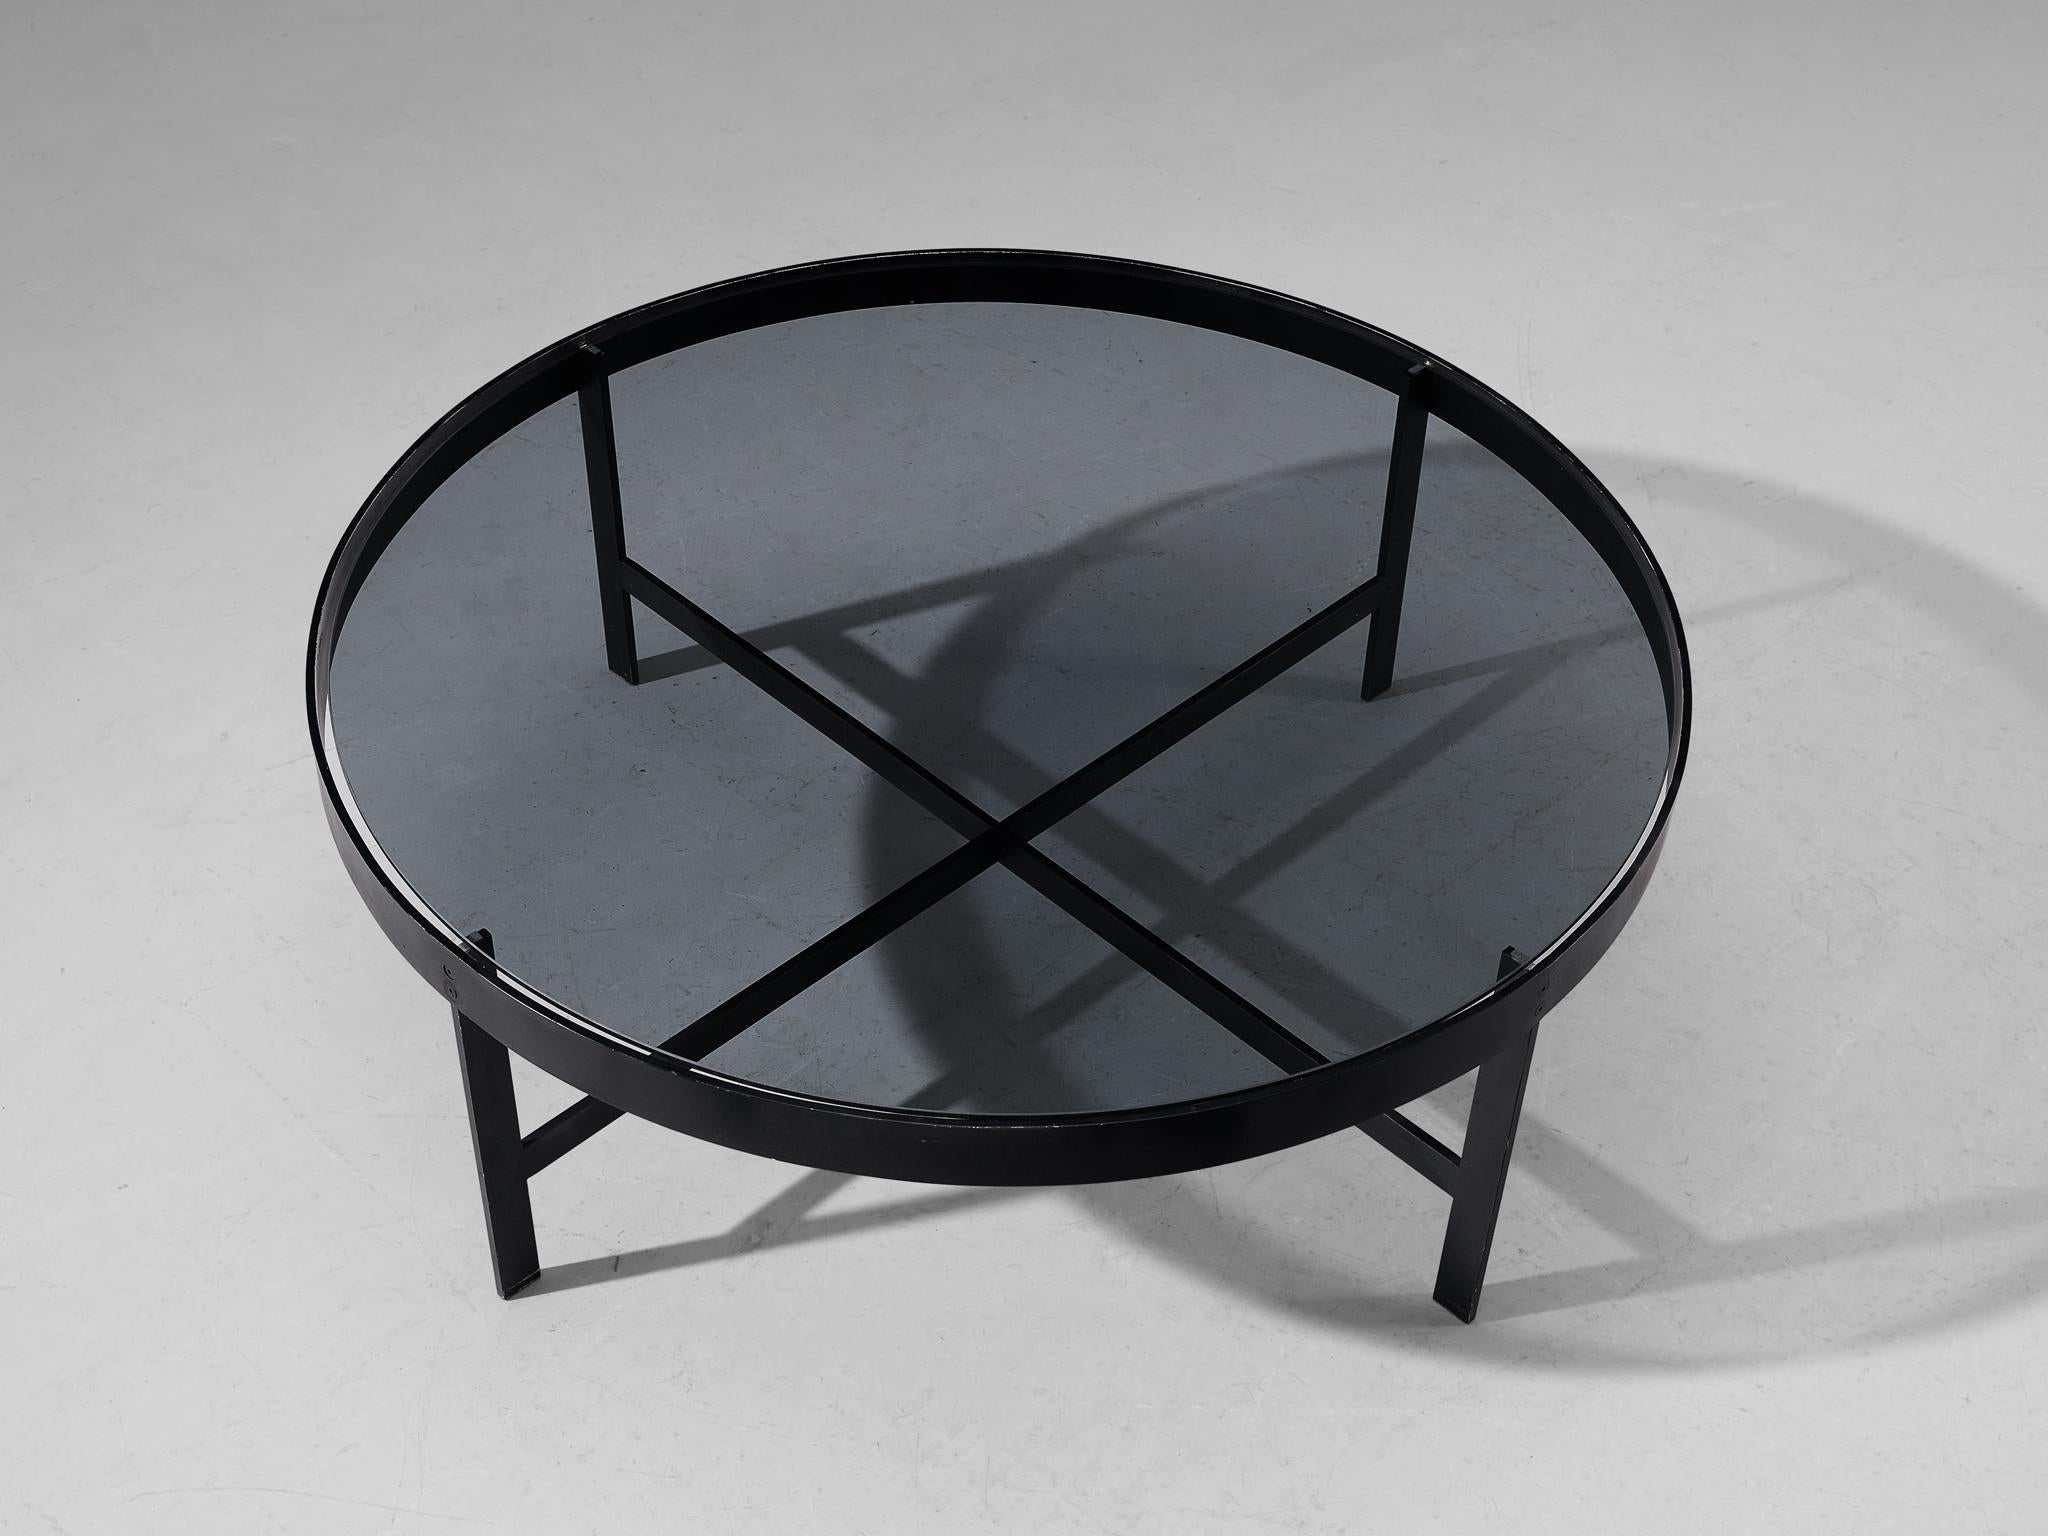 Janni Van Pelt, coffee table, glass, lacquered metal, The Netherlands, circa 1958.

Round coffee table in black coated metal and glass. This table is a variation on Janni Van Pelt's coffee table model G4. The base consists of four legs with a